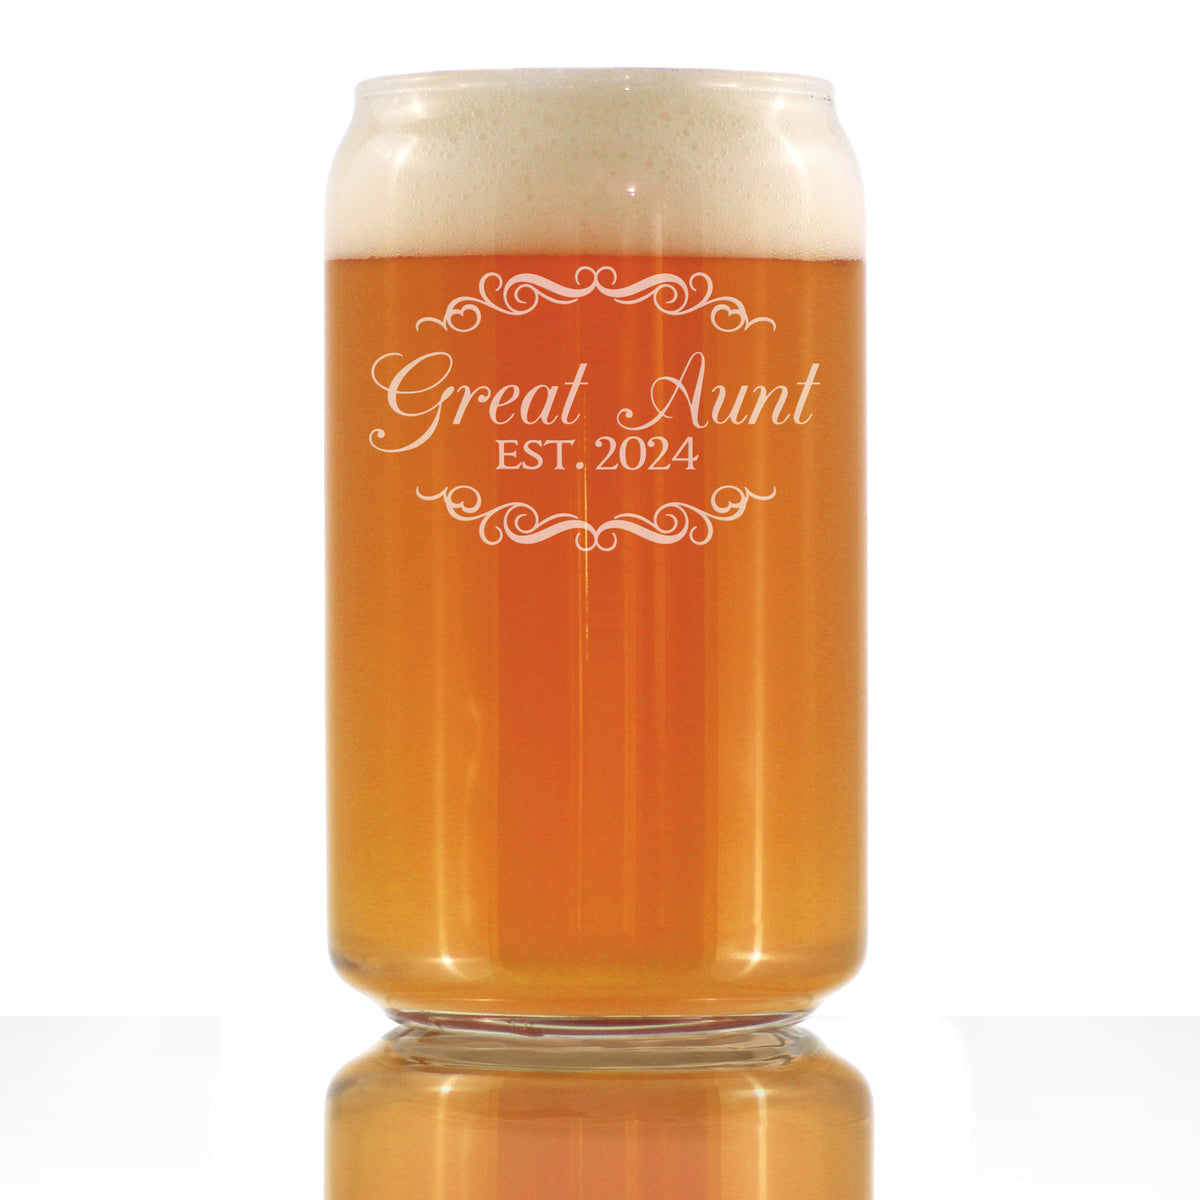 Great Aunt Est 2024 - New Great Aunts Beer Can Pint Glass Gift for First Time Great Aunts - Decorative 16 Oz Glasses